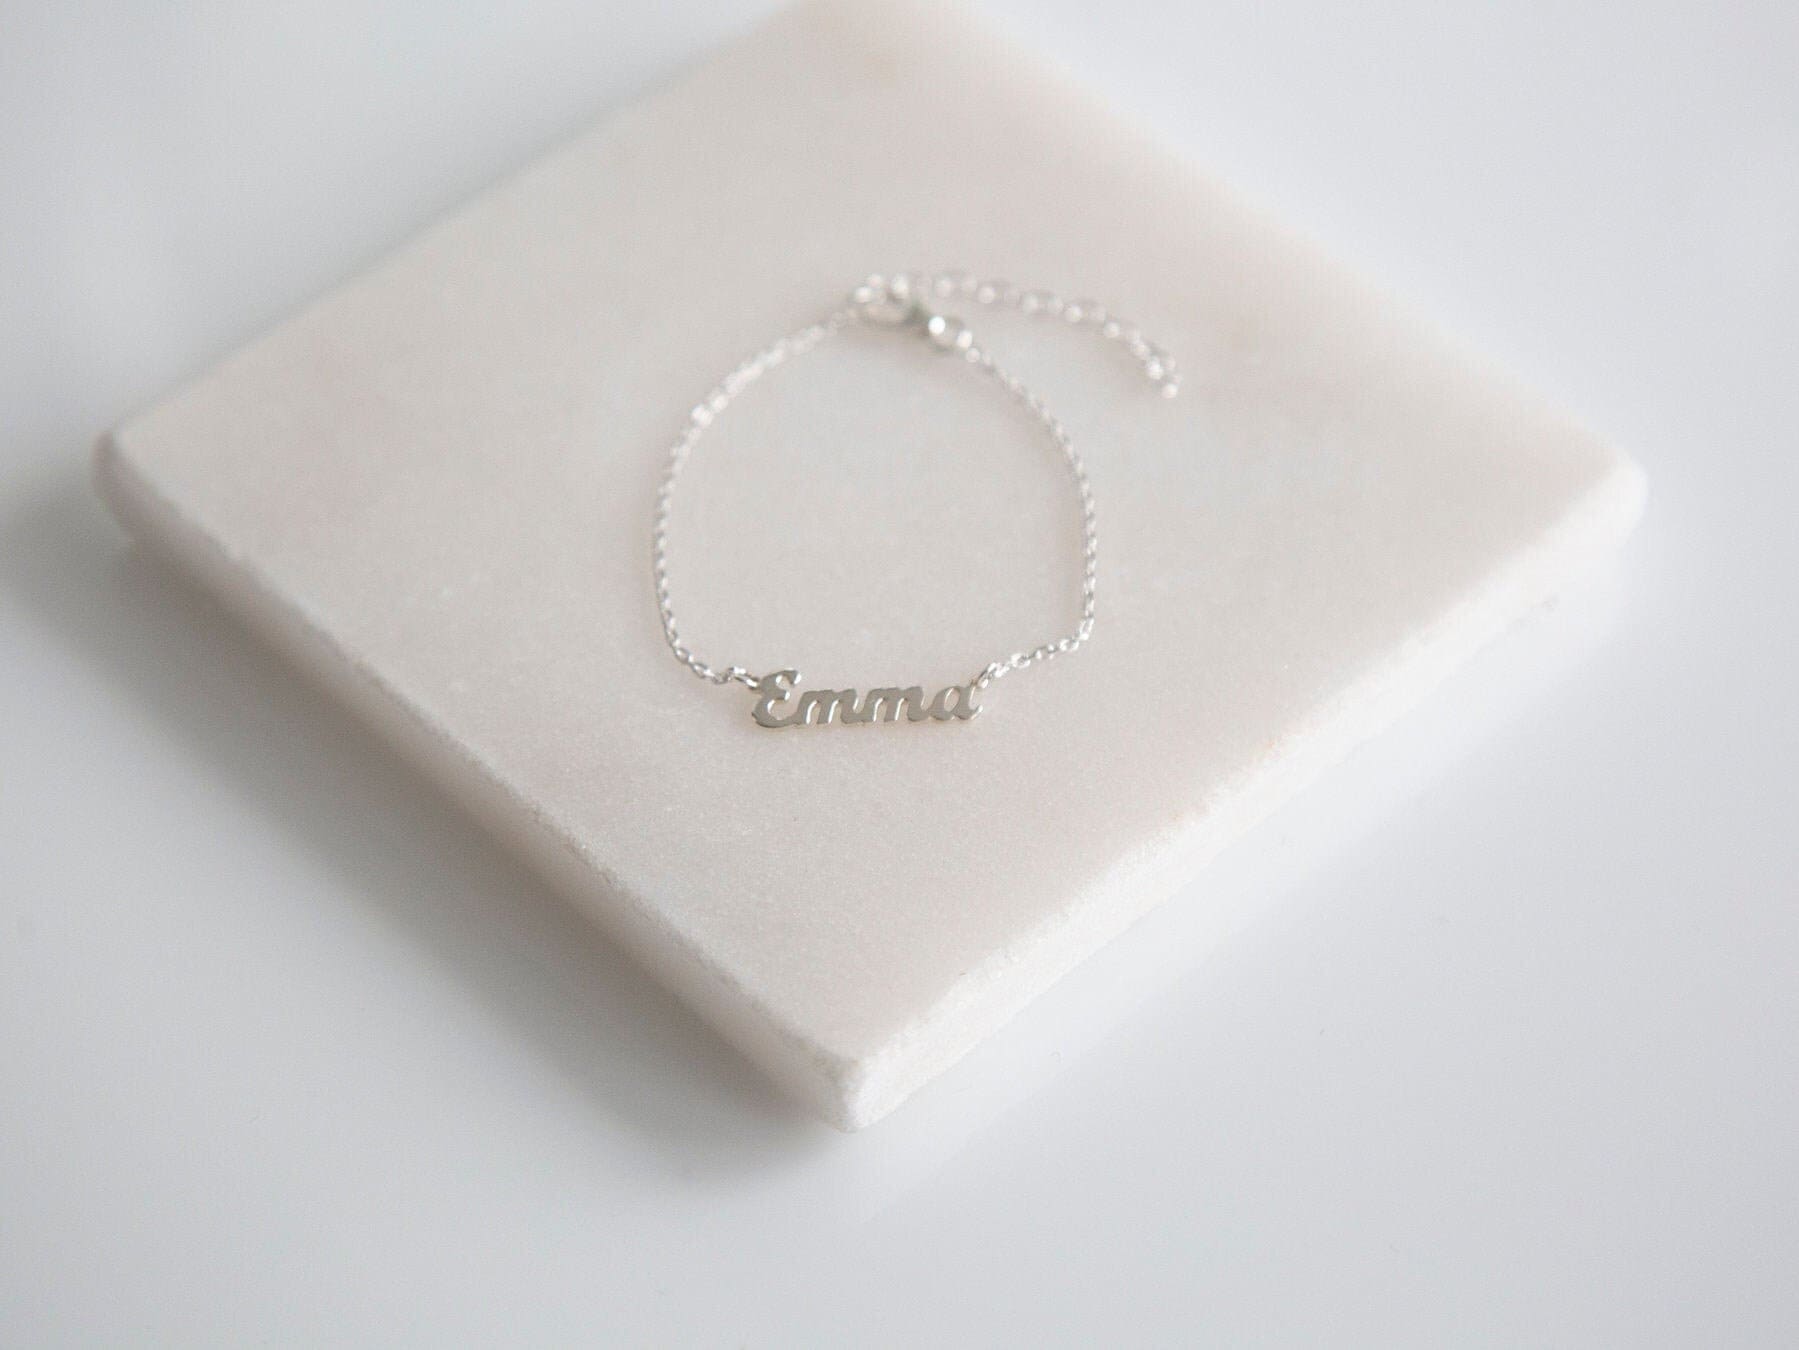 Minimalist Sterling Silver Chain Bracelet - Personalized Monogram Initials  - Crossed Arrows - The Basics: Rectangle ID Plate - SPUNK by CM